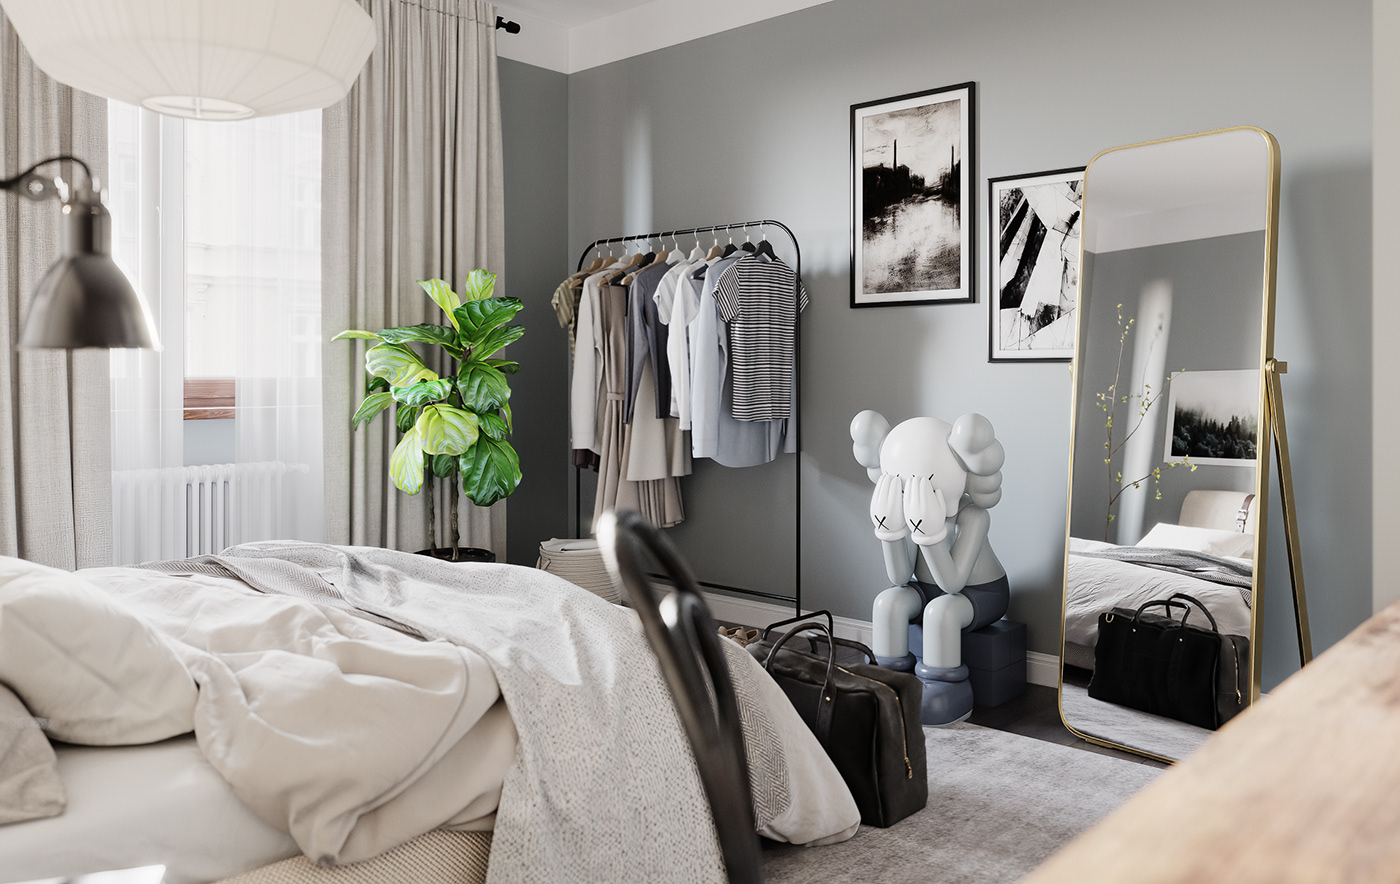 Instead of a wardrobe, the owner prefers a cloth rack to save area to the bedroom.